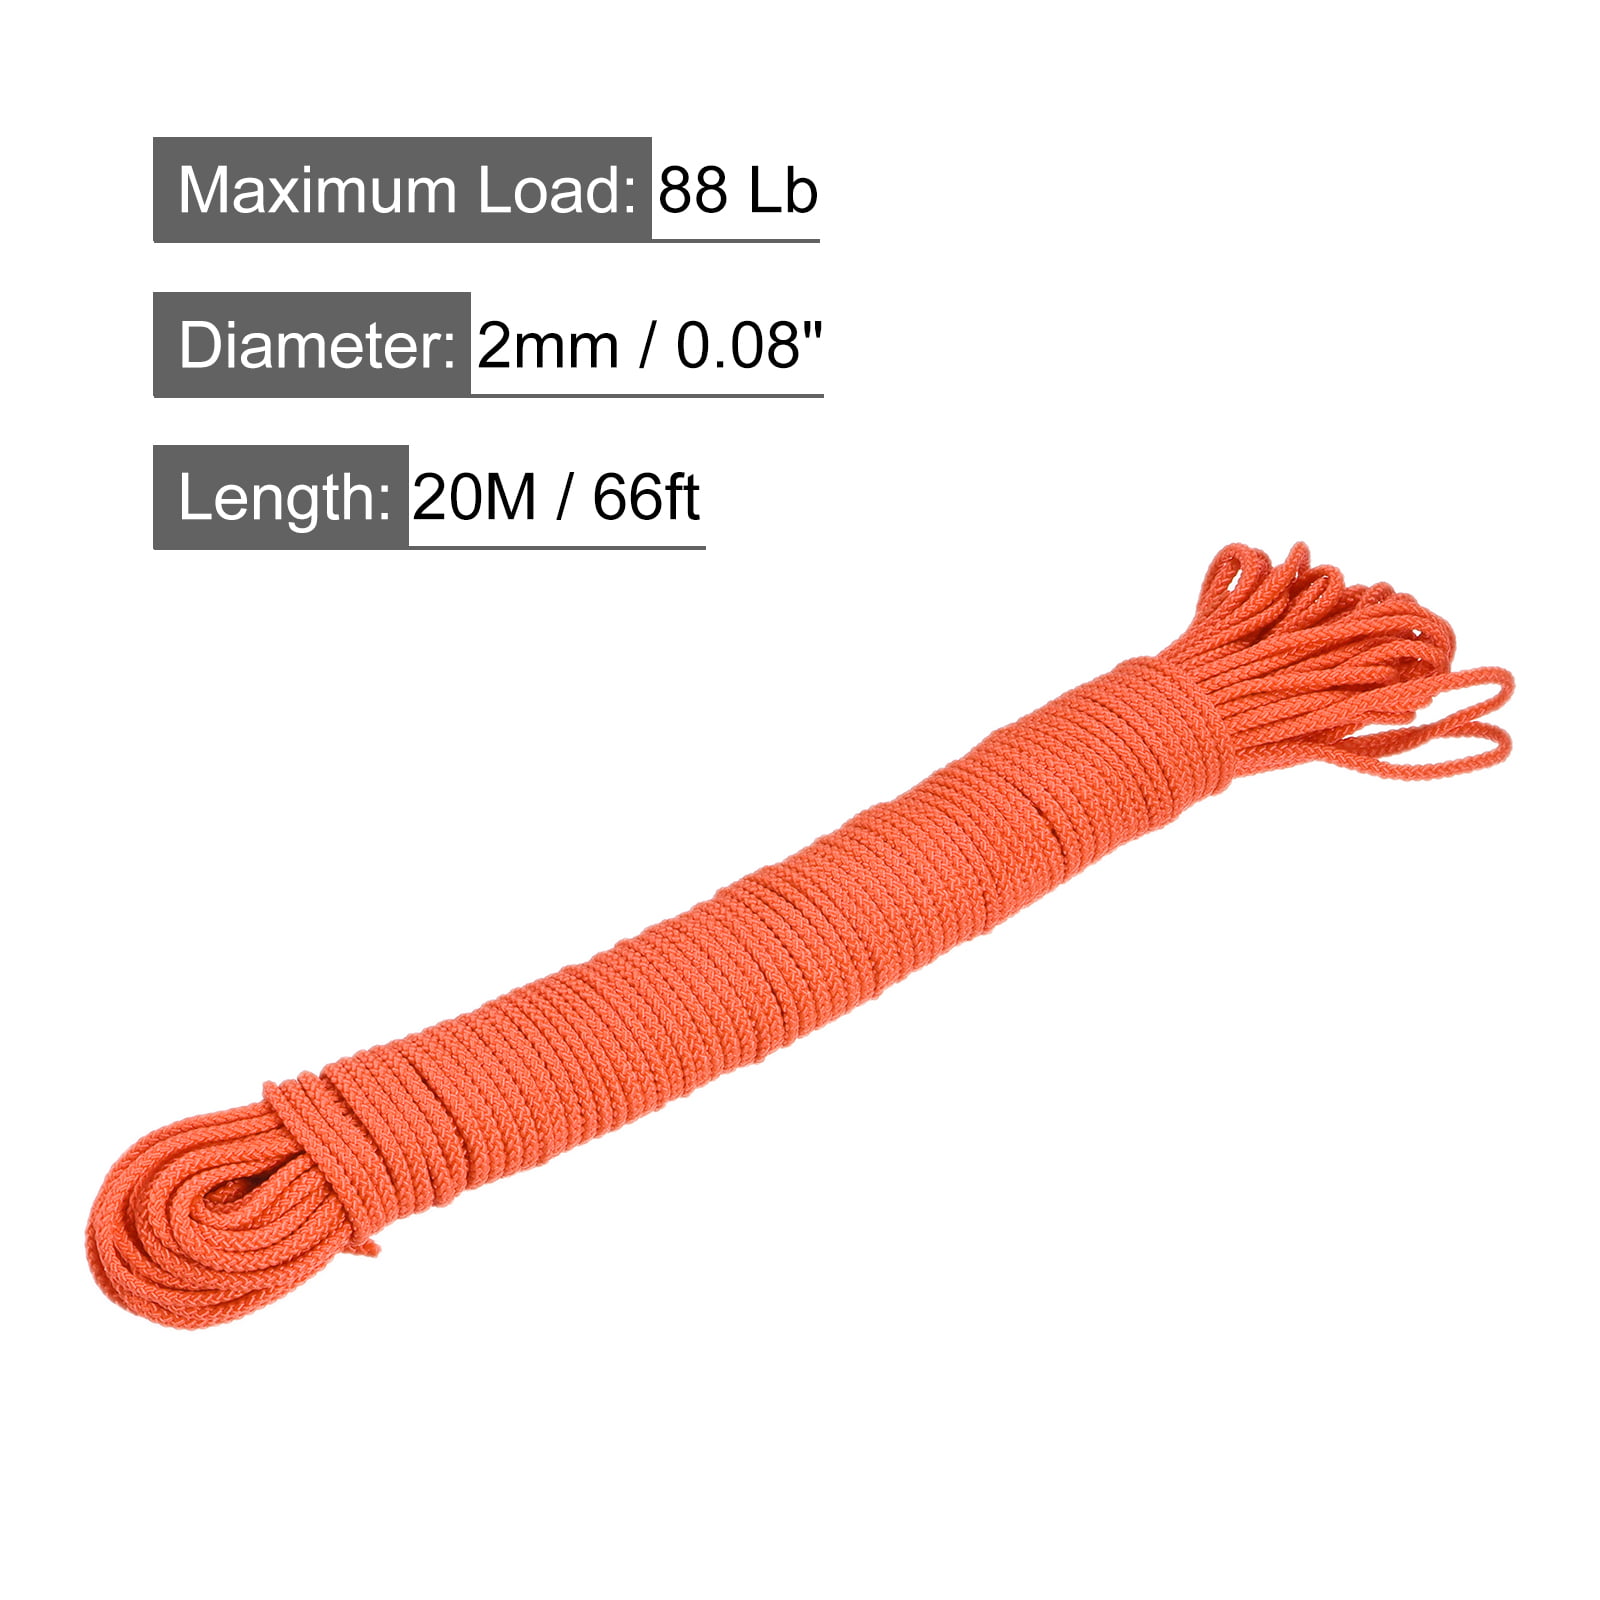 Polypropylene Rope Braid Cord 20M/66ft 2mm Dia Orange for Indoor Outdoor  Camping Clothes Line 